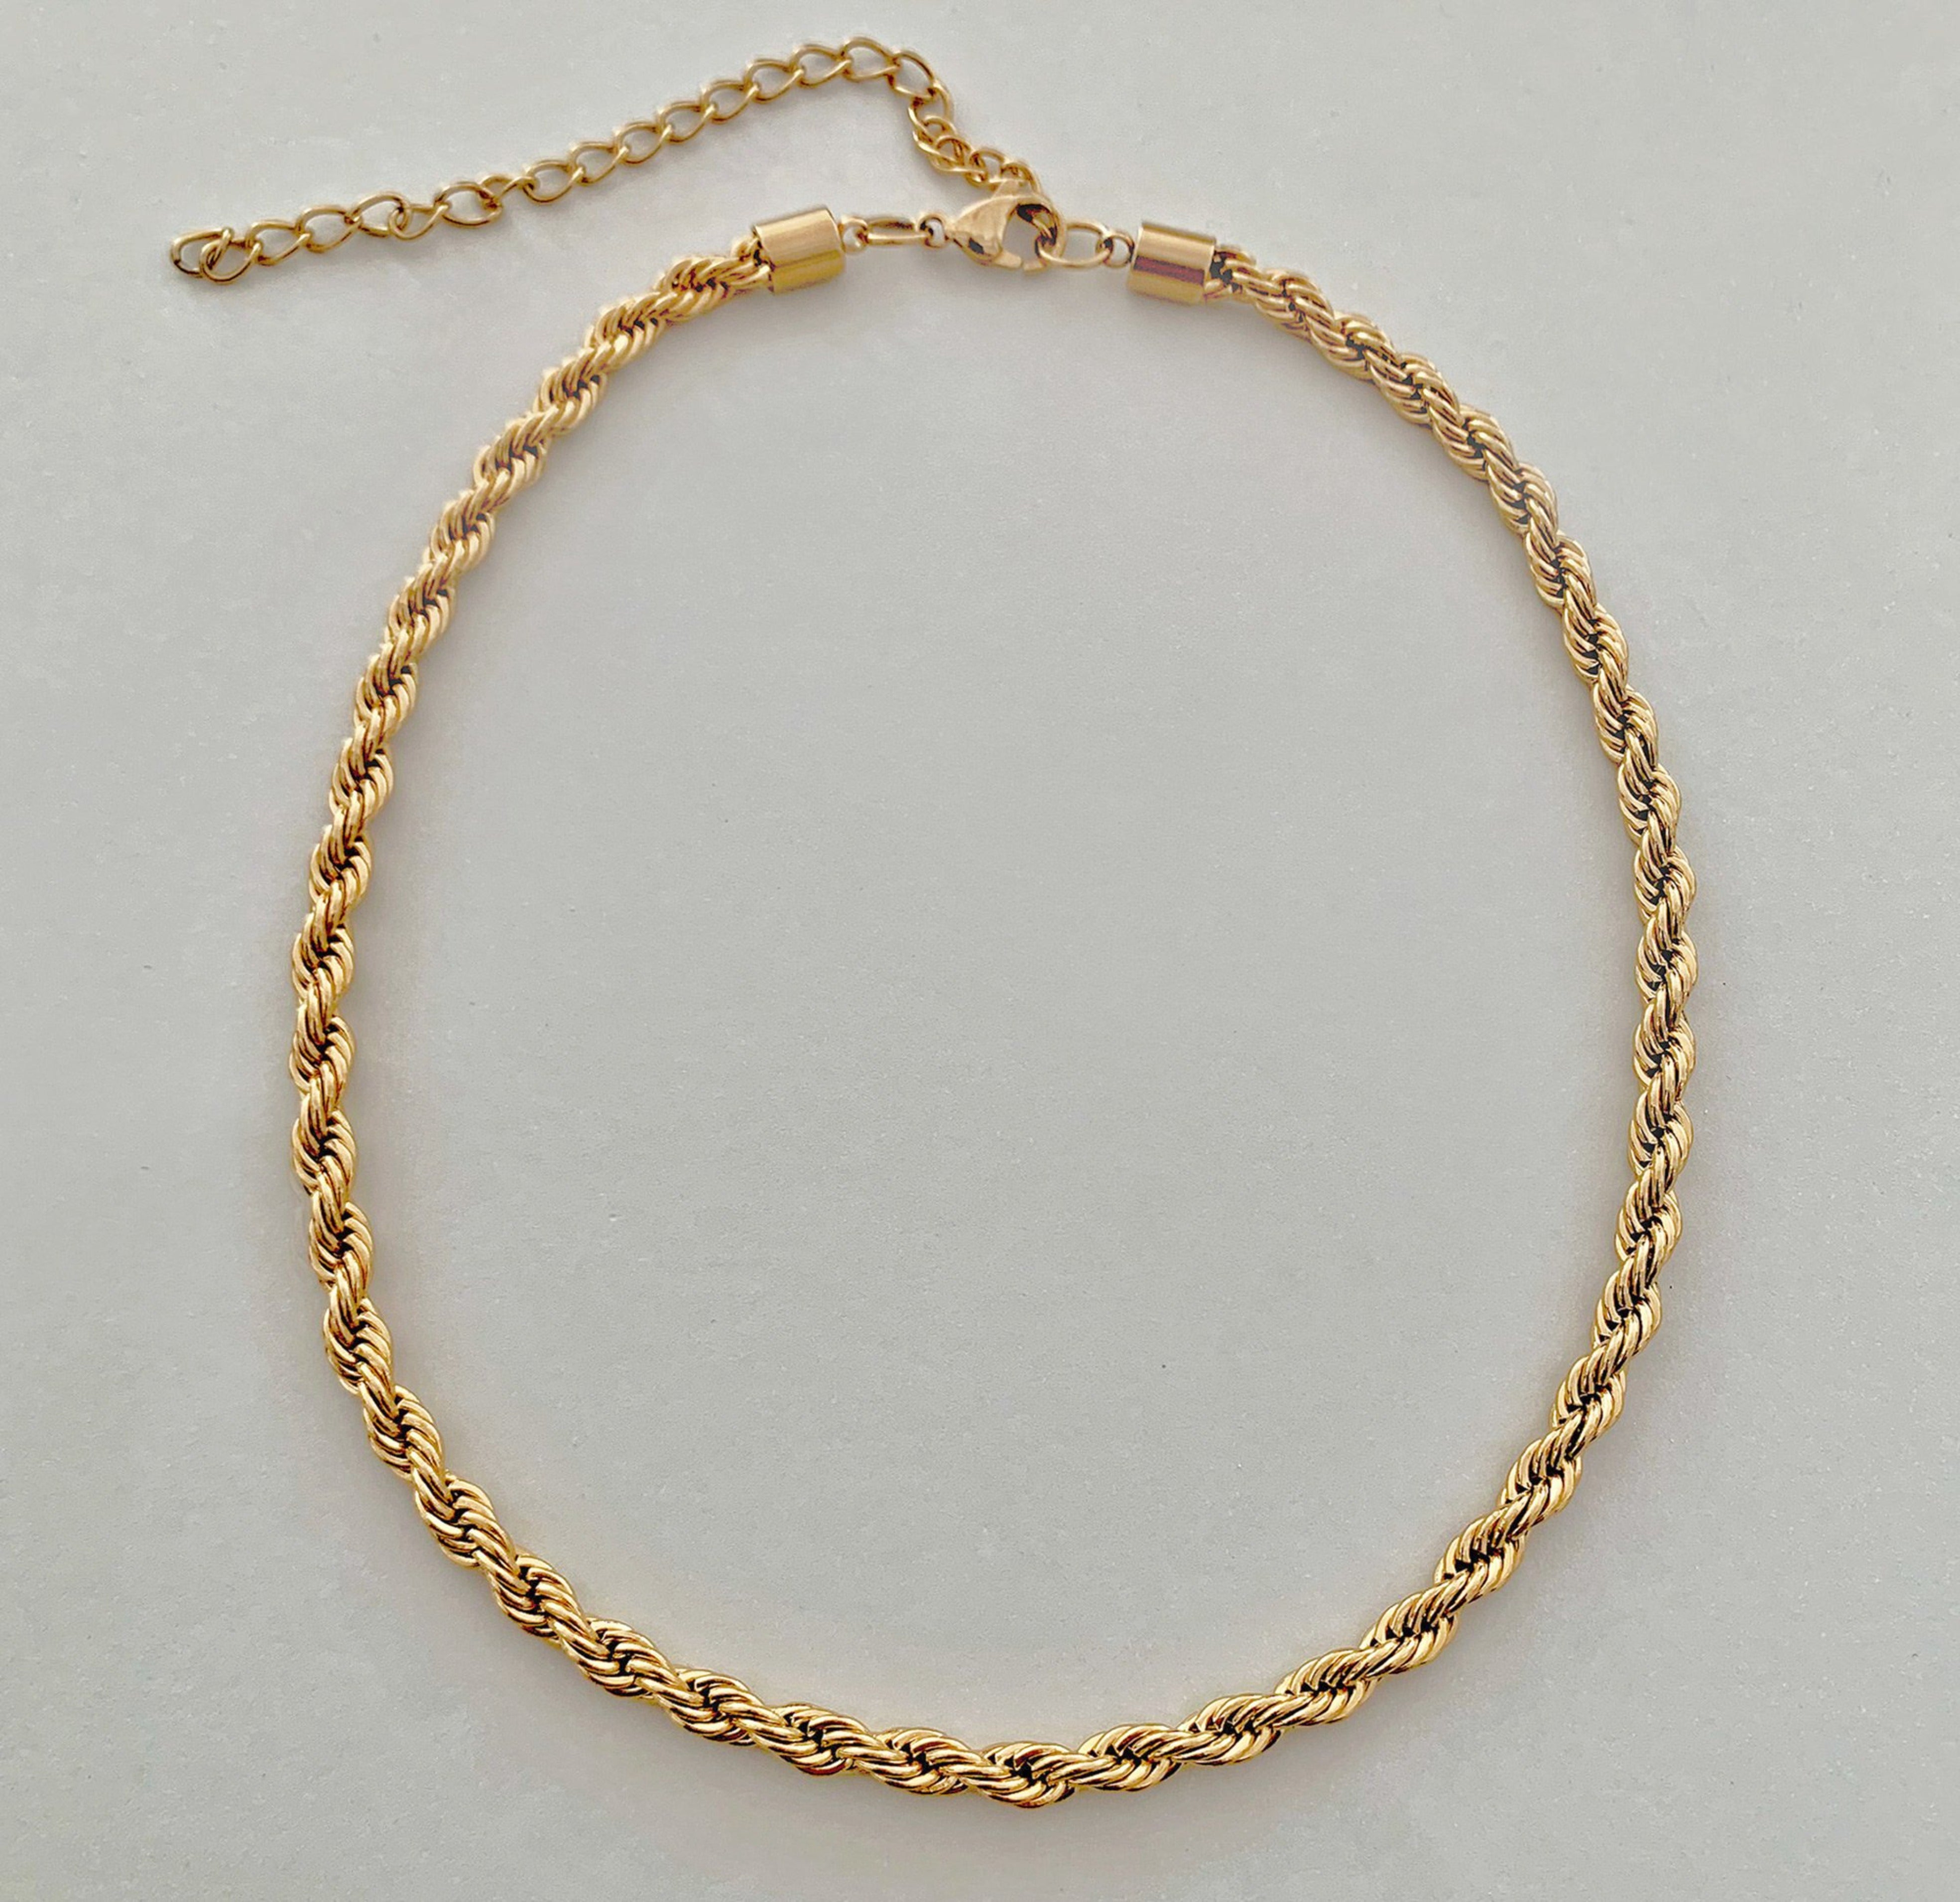 RONNIE ROPE CHAIN NECKLACE - SAMPLE